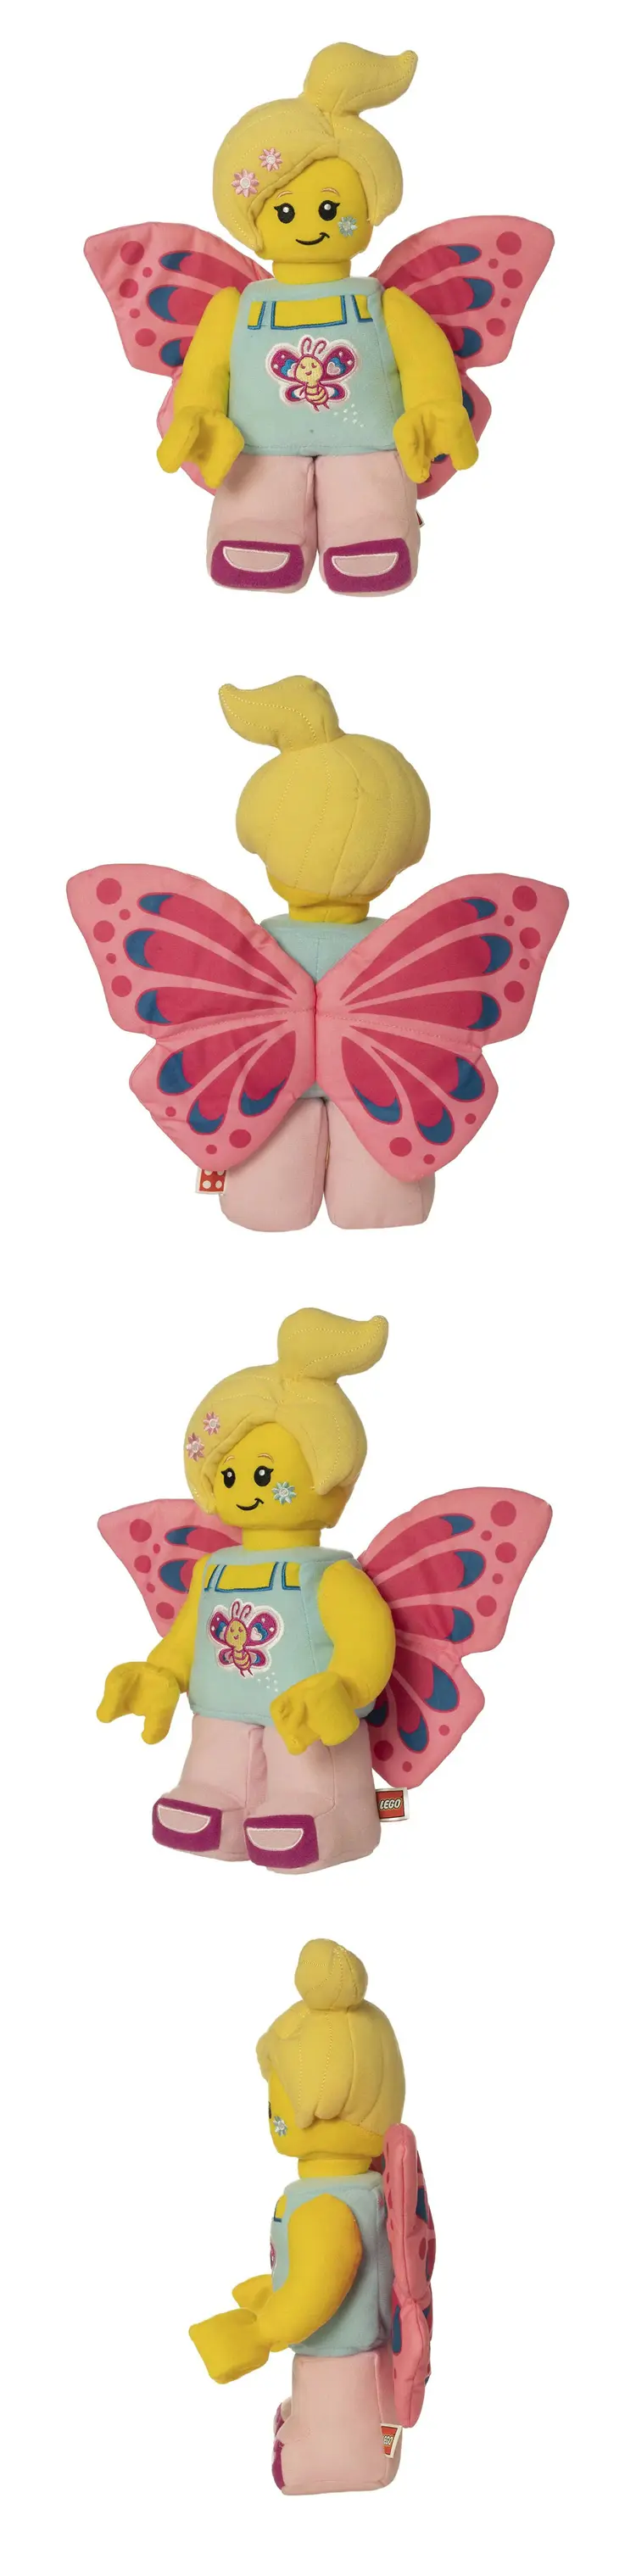 Manhattan toy Lego Iconic Butterfly 招牌蝴蝶